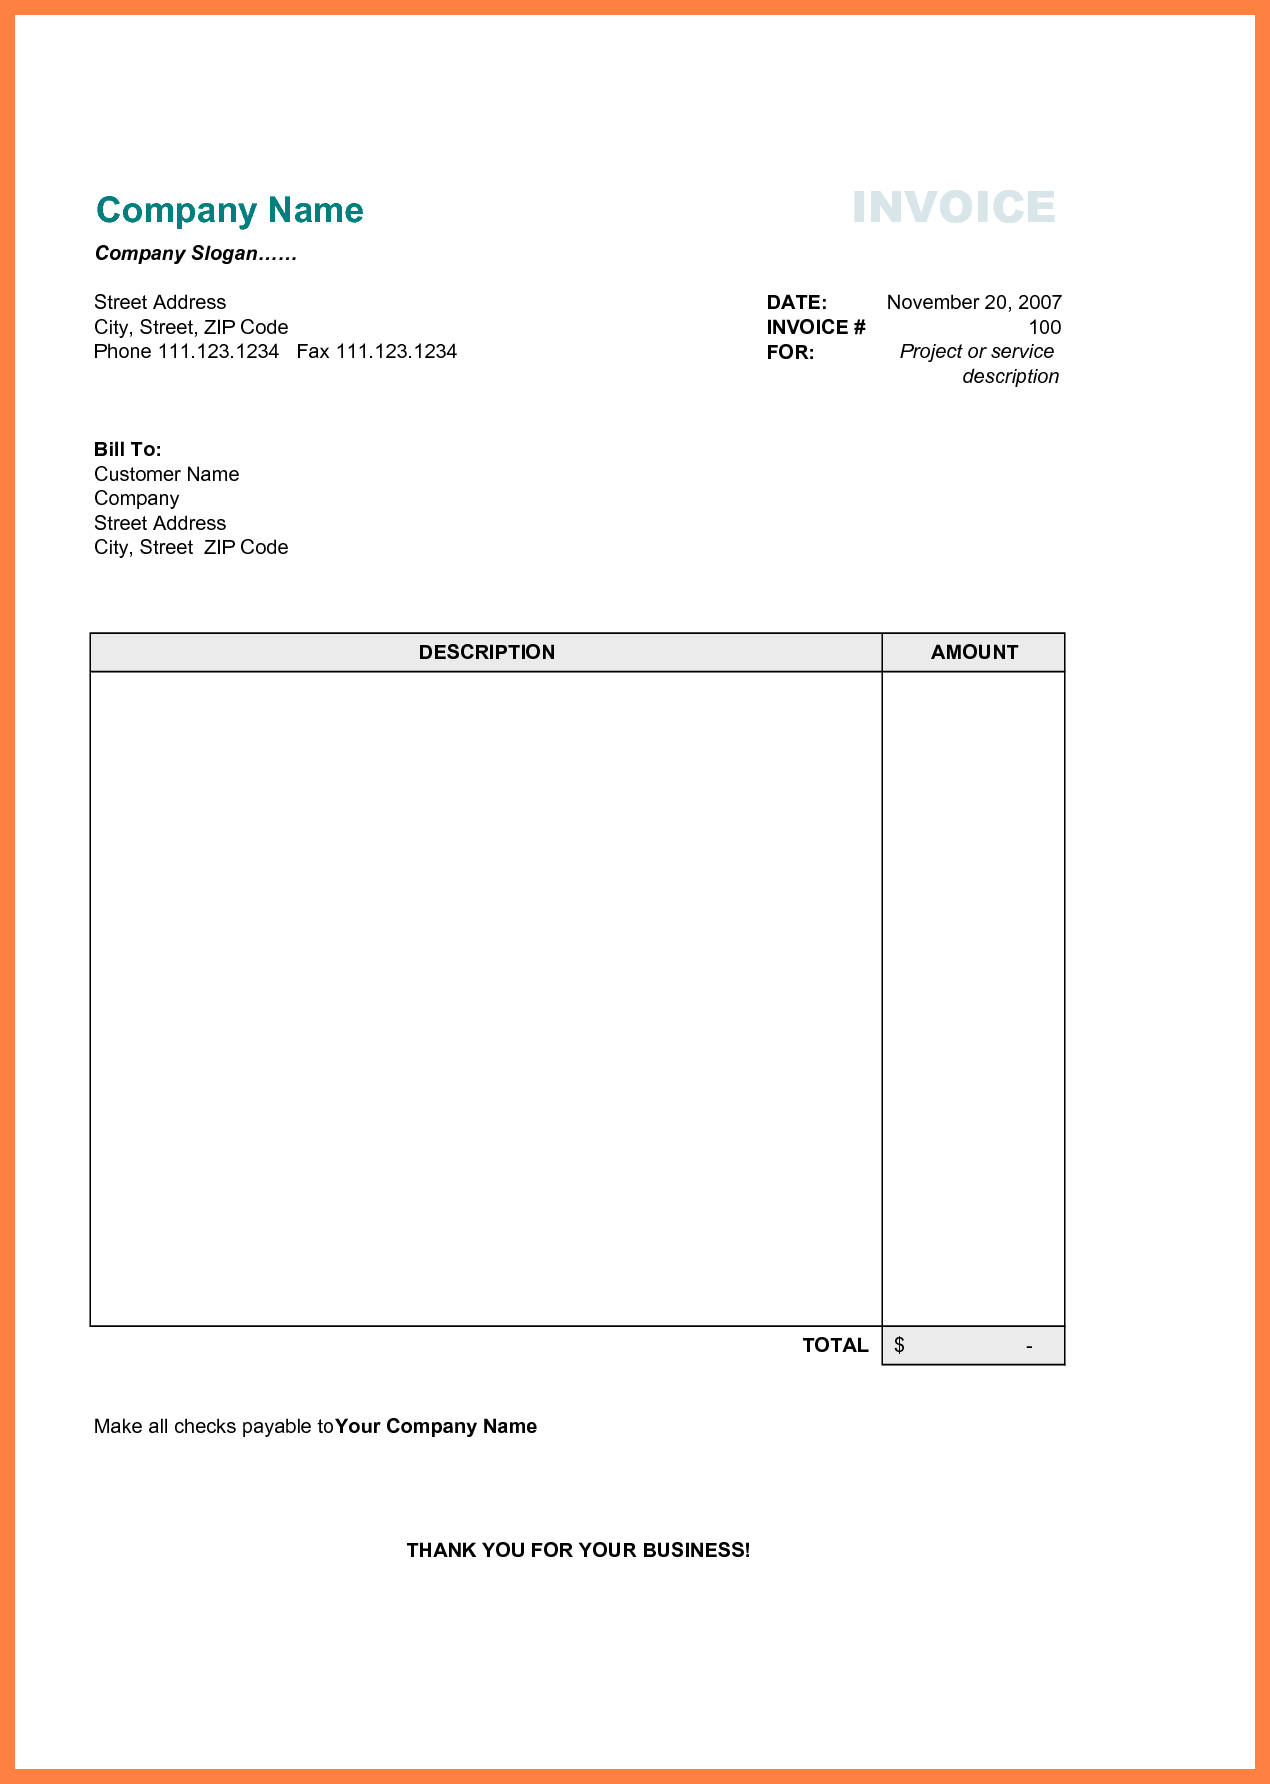 Free Printable Business Invoice Template  Invoice Format In Excel for Free Sample Invoice Template Word